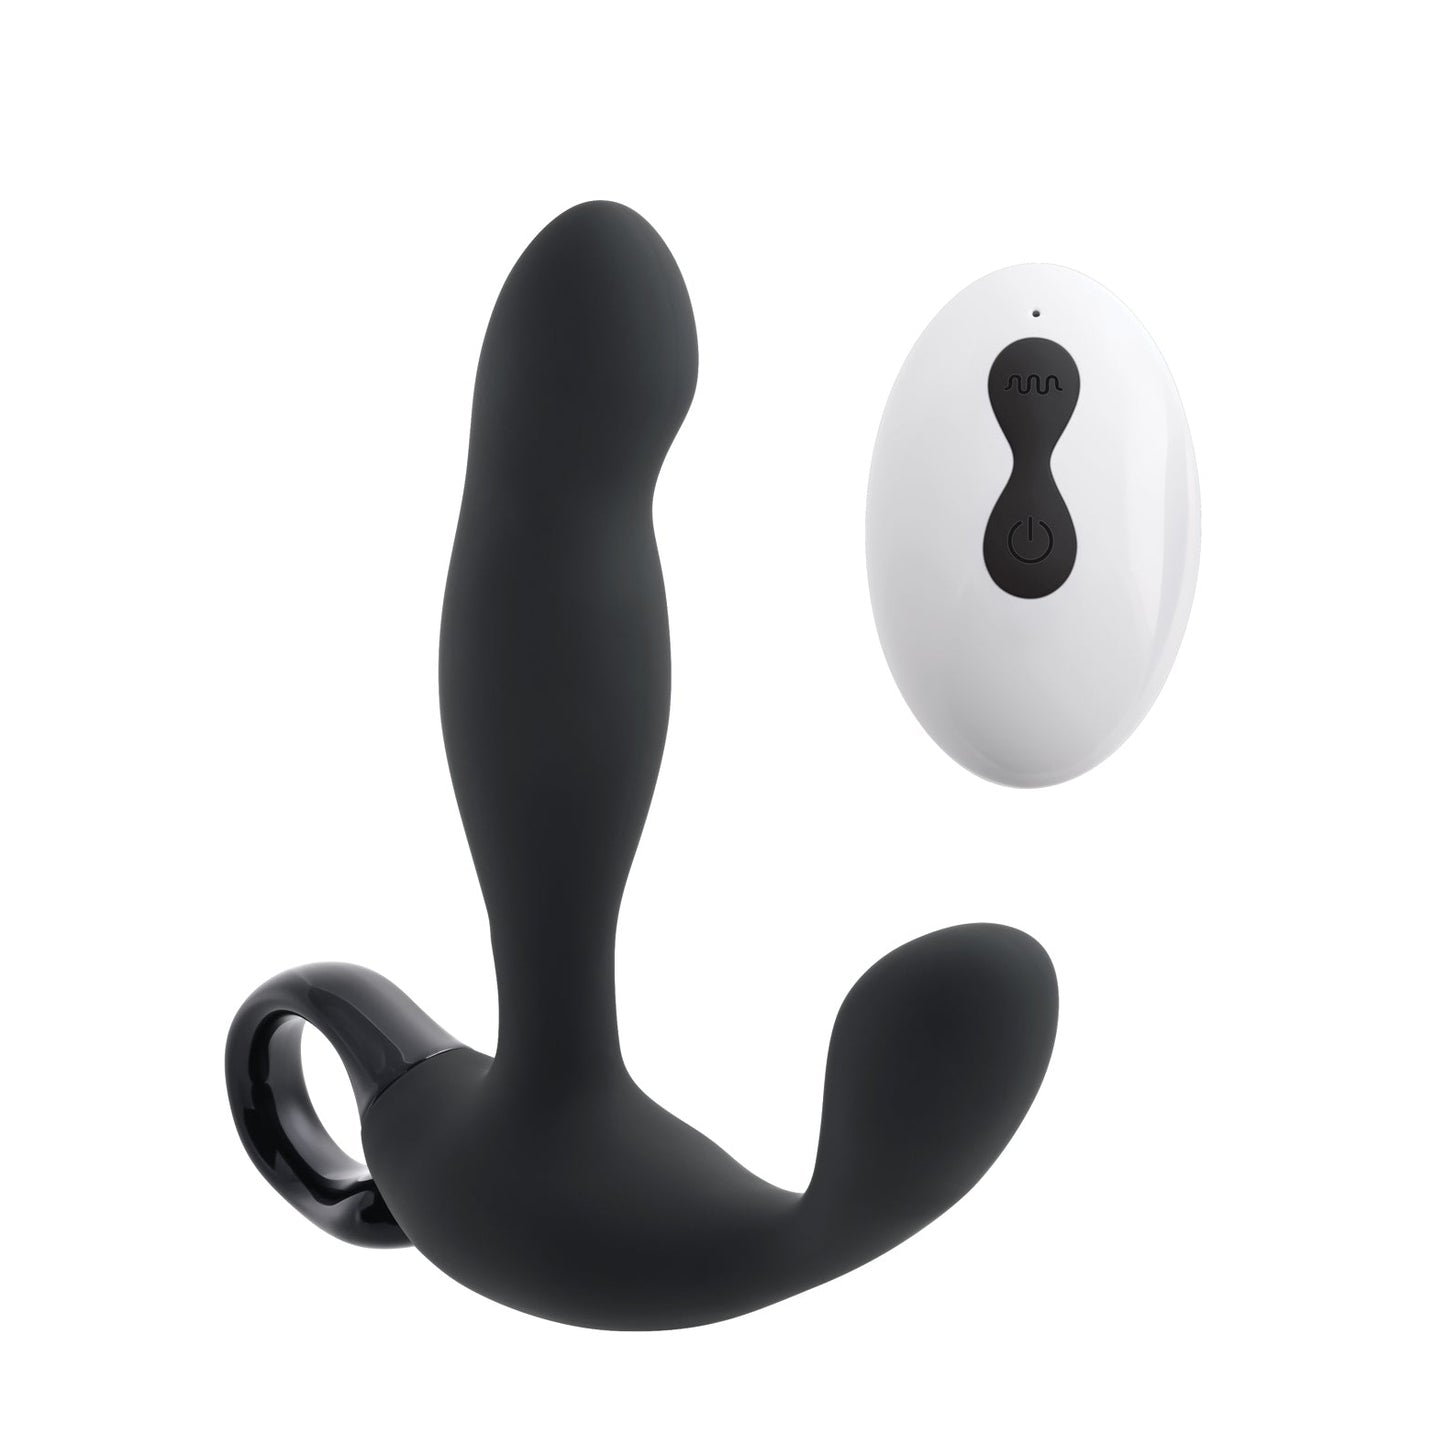 Playboy Pleasure Come Hither Prostate Massager - 2 AM